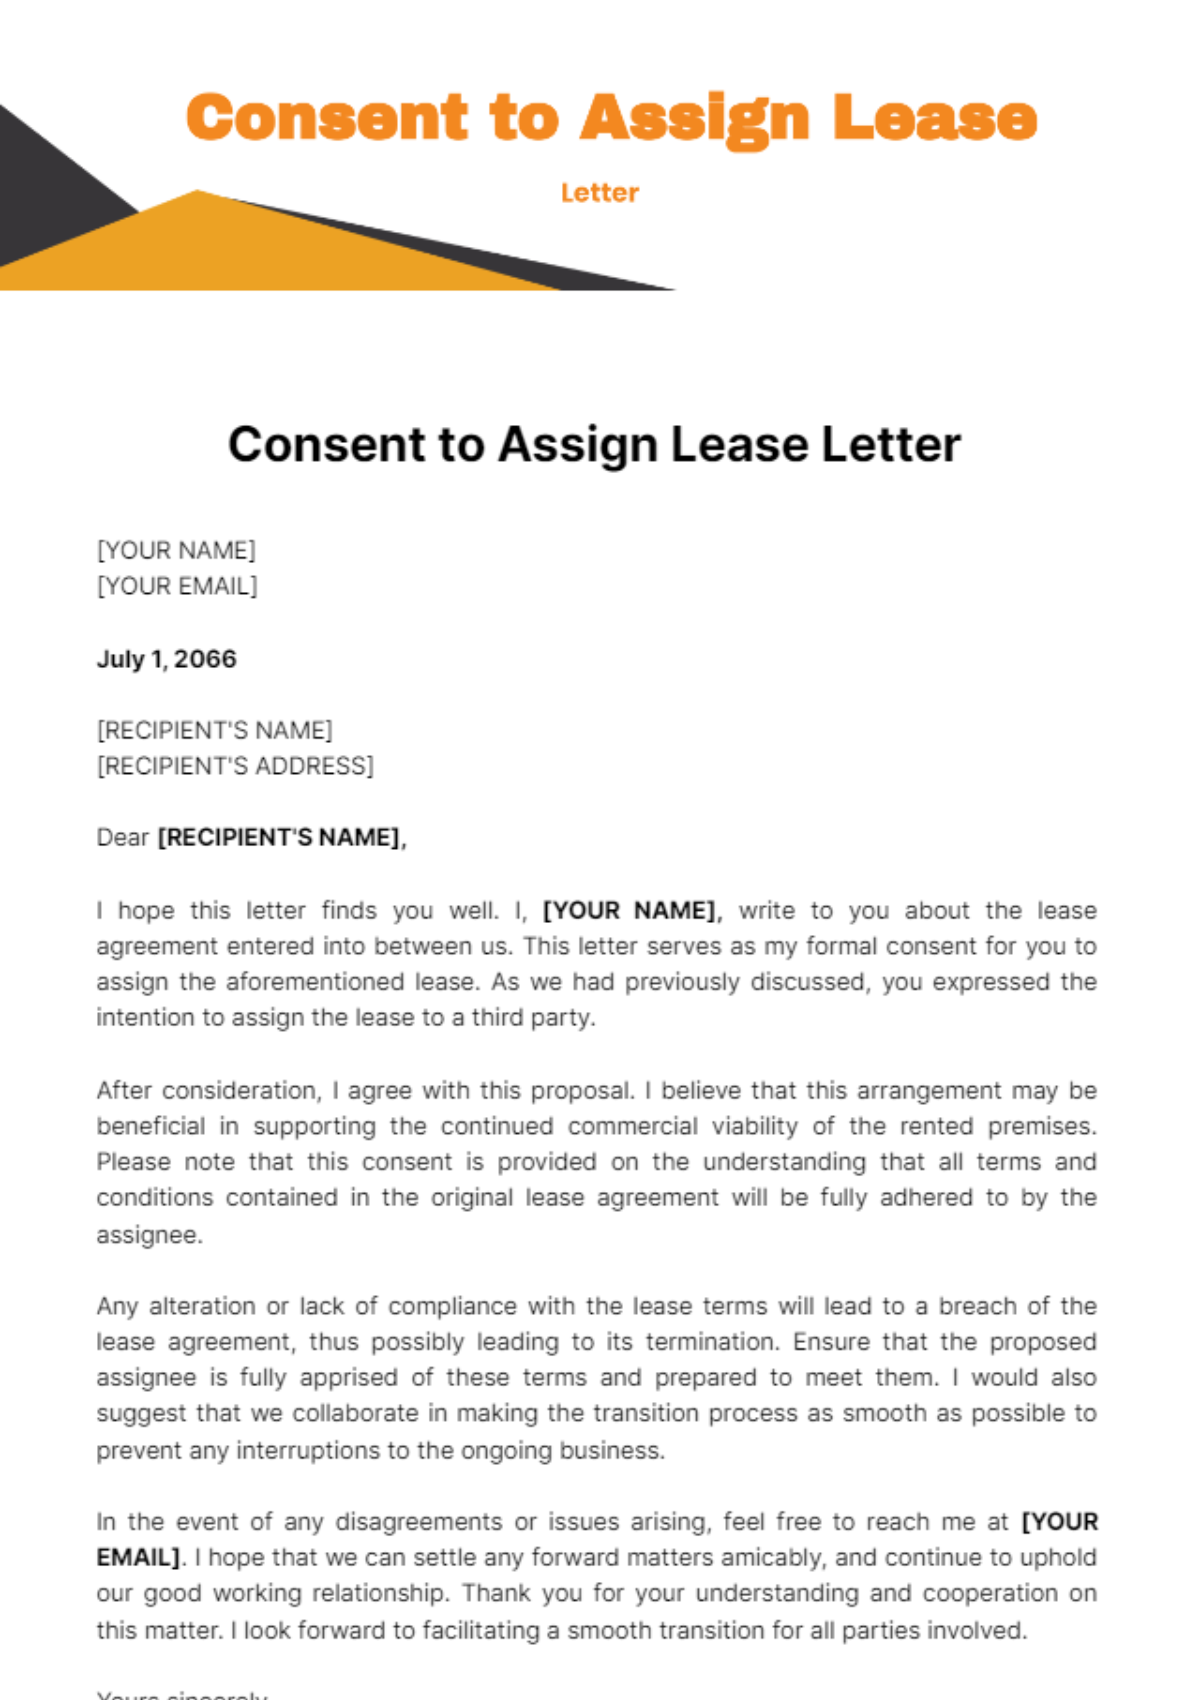 Consent to Assign Lease Letter Template